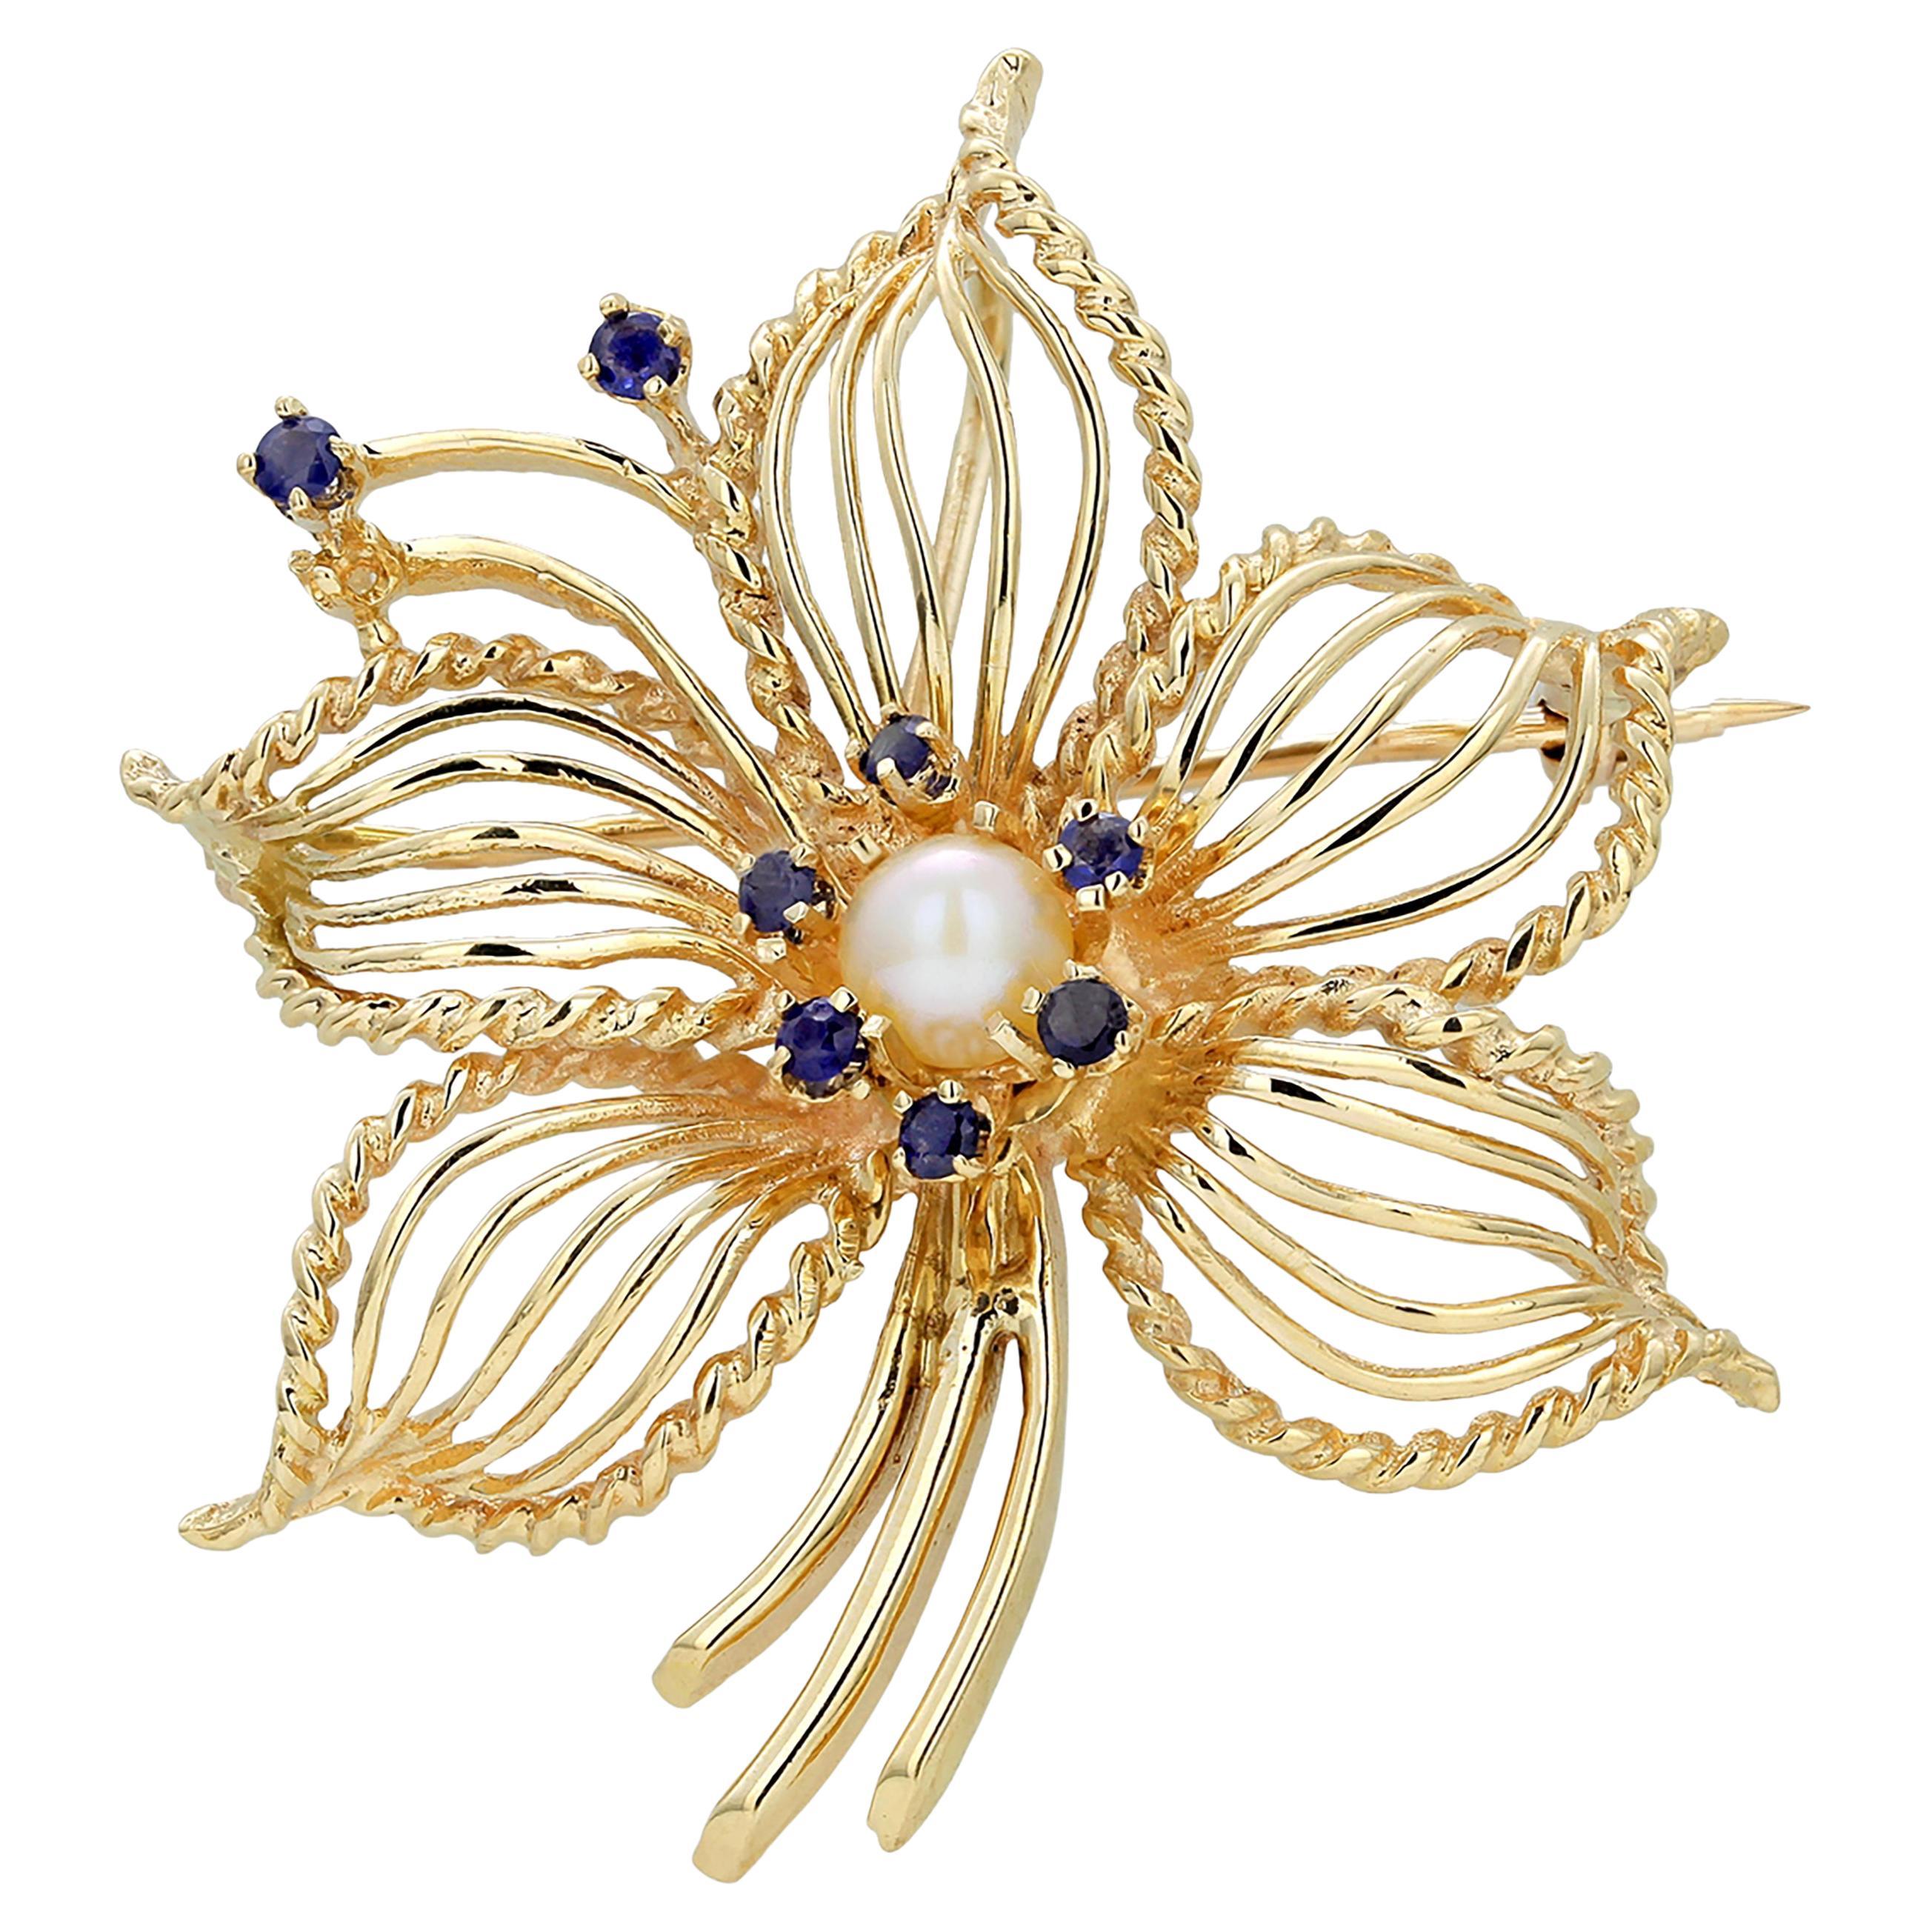  Circa 1940 Vintage Sapphire and Pearl Convertible Yellow Gold Pendant Brooch